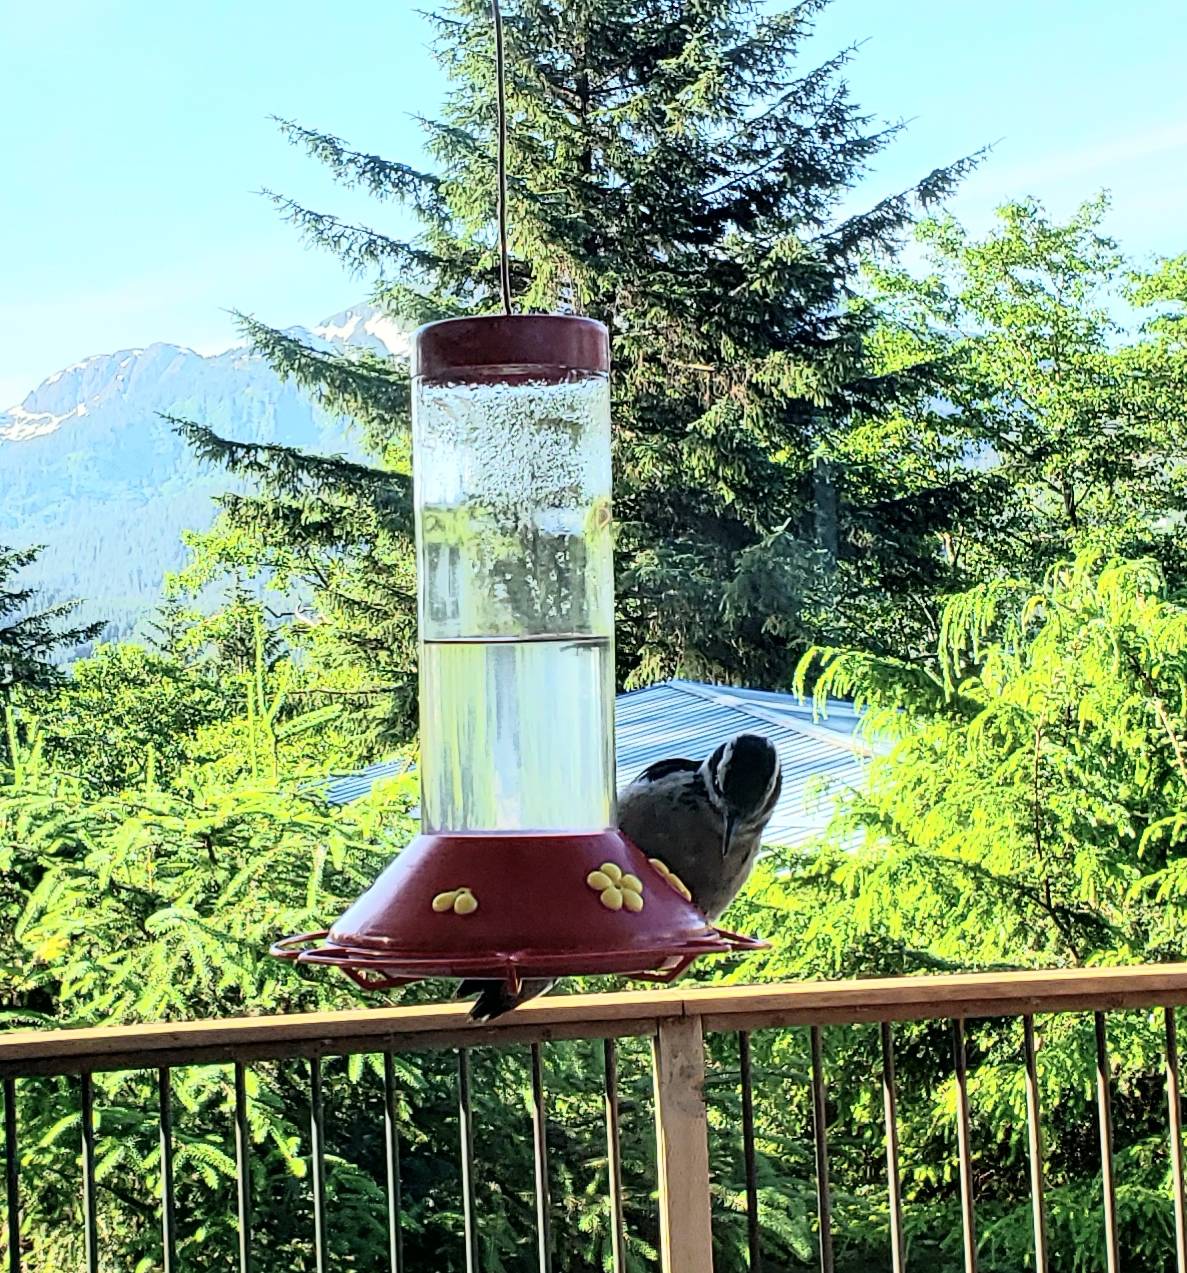 “I am visiting my brother with my family,” writes Bill Sauerteig. “We have been watching this hairy woodpecker enjoy sugar water from the hummingbird feeder the past few days.” (Courtesy Photo | Bill Sauerteig)